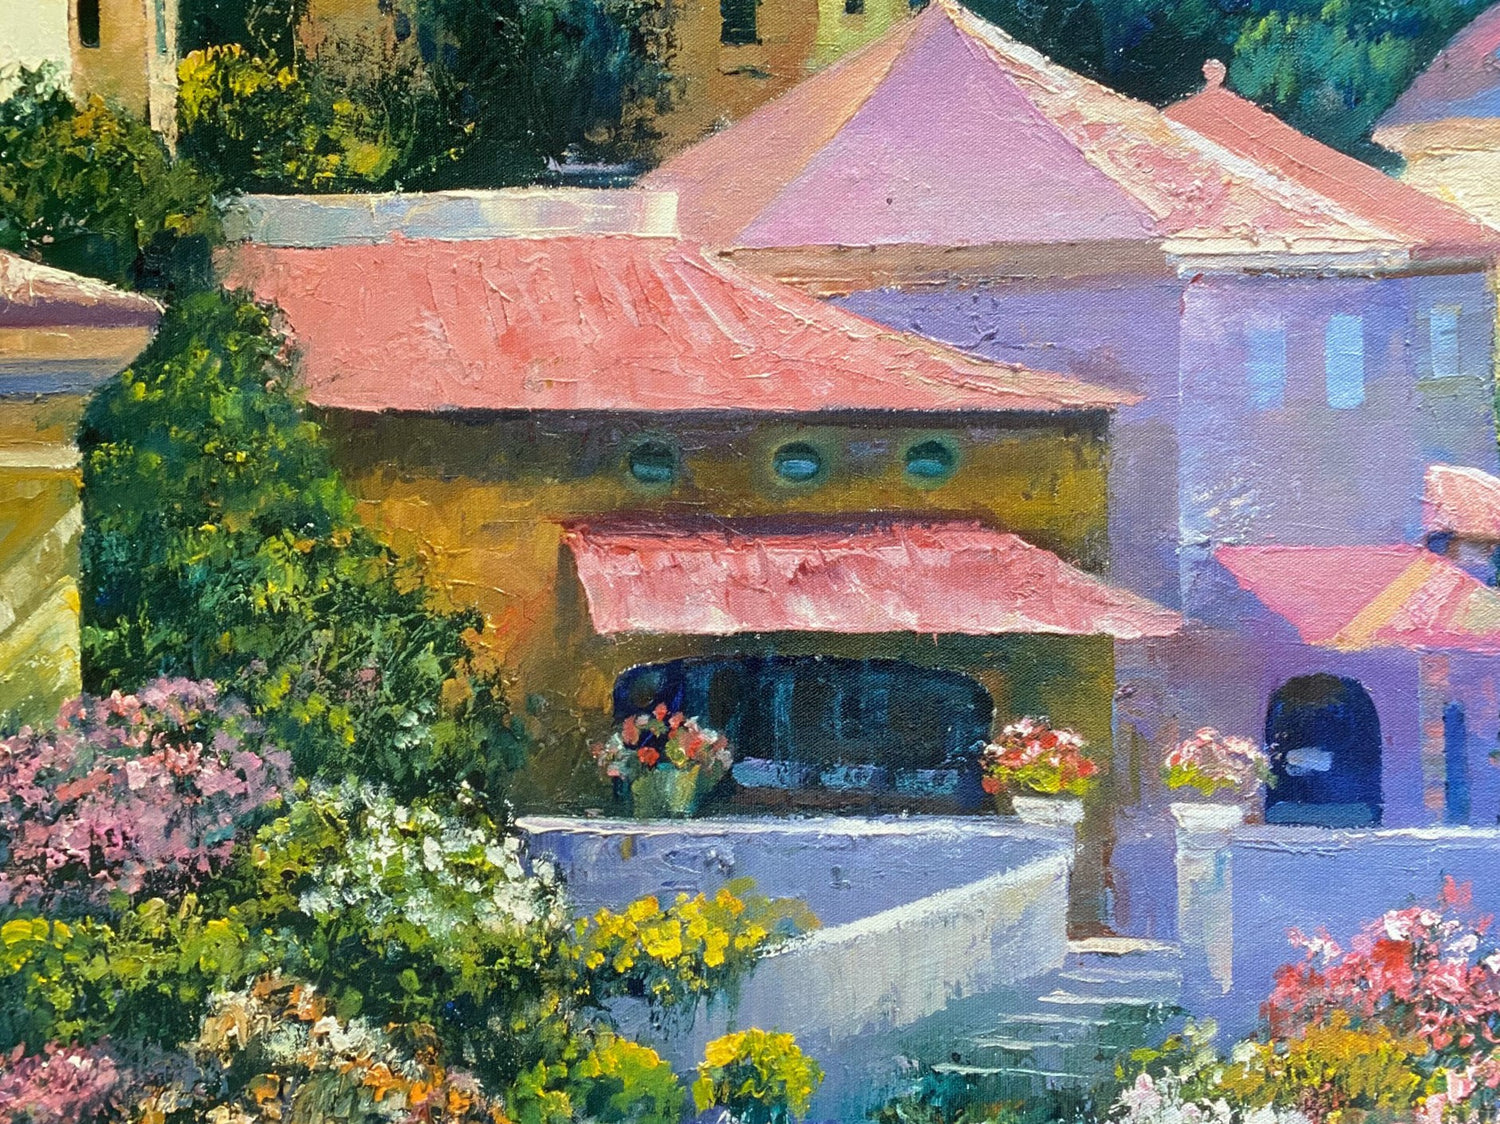  Villas of Italy Howard Behrens Canvas Giclée Artist Hand Signed and Numbered